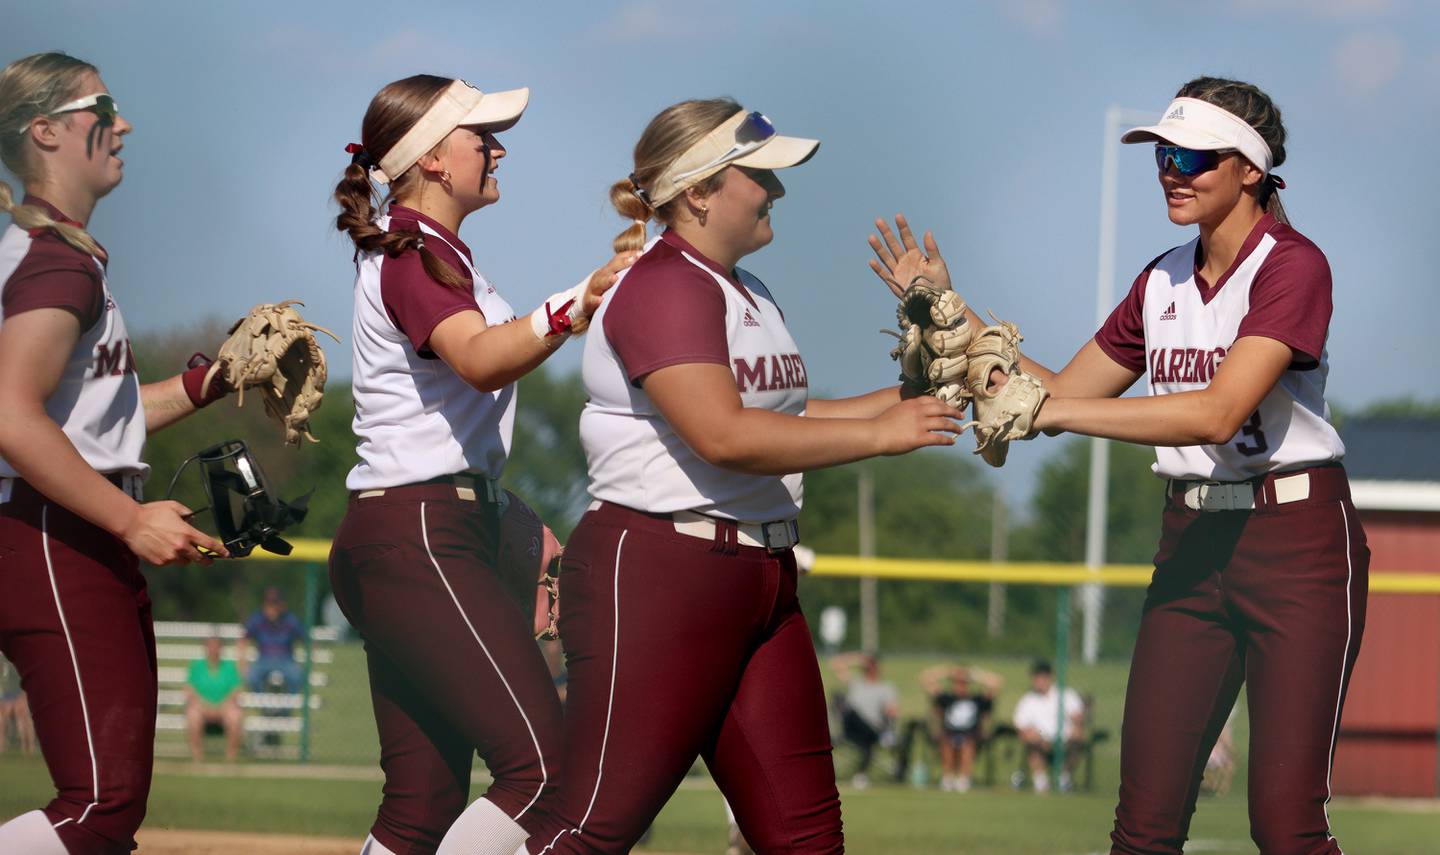 Marengo players, from left, Lilly Kunzer, Gabby Christopher, Emily White and Marissa Young arrive at the dugout at the end of an inning against North Boone in IHSA Softball Class 2A Regional Championship action at Marengo Friday.